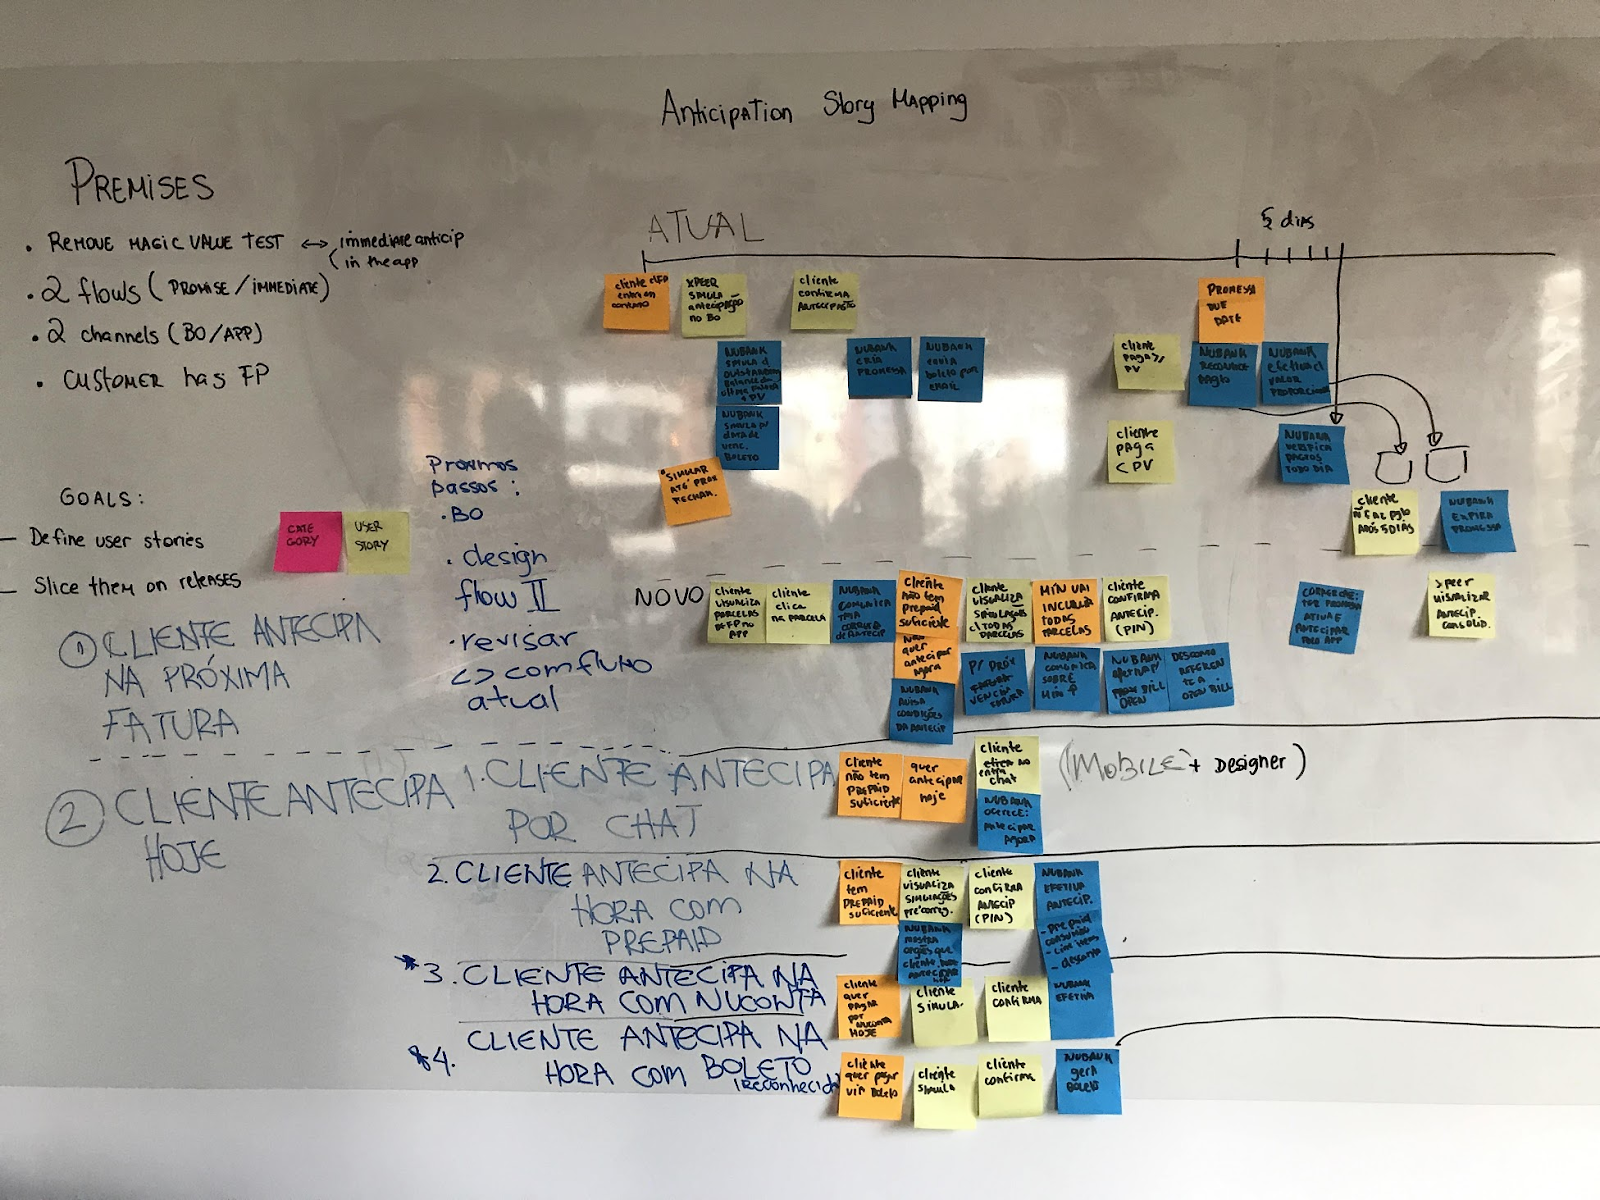 Anticipation user story mapping - each color represents a type of user (Nubank, customer).